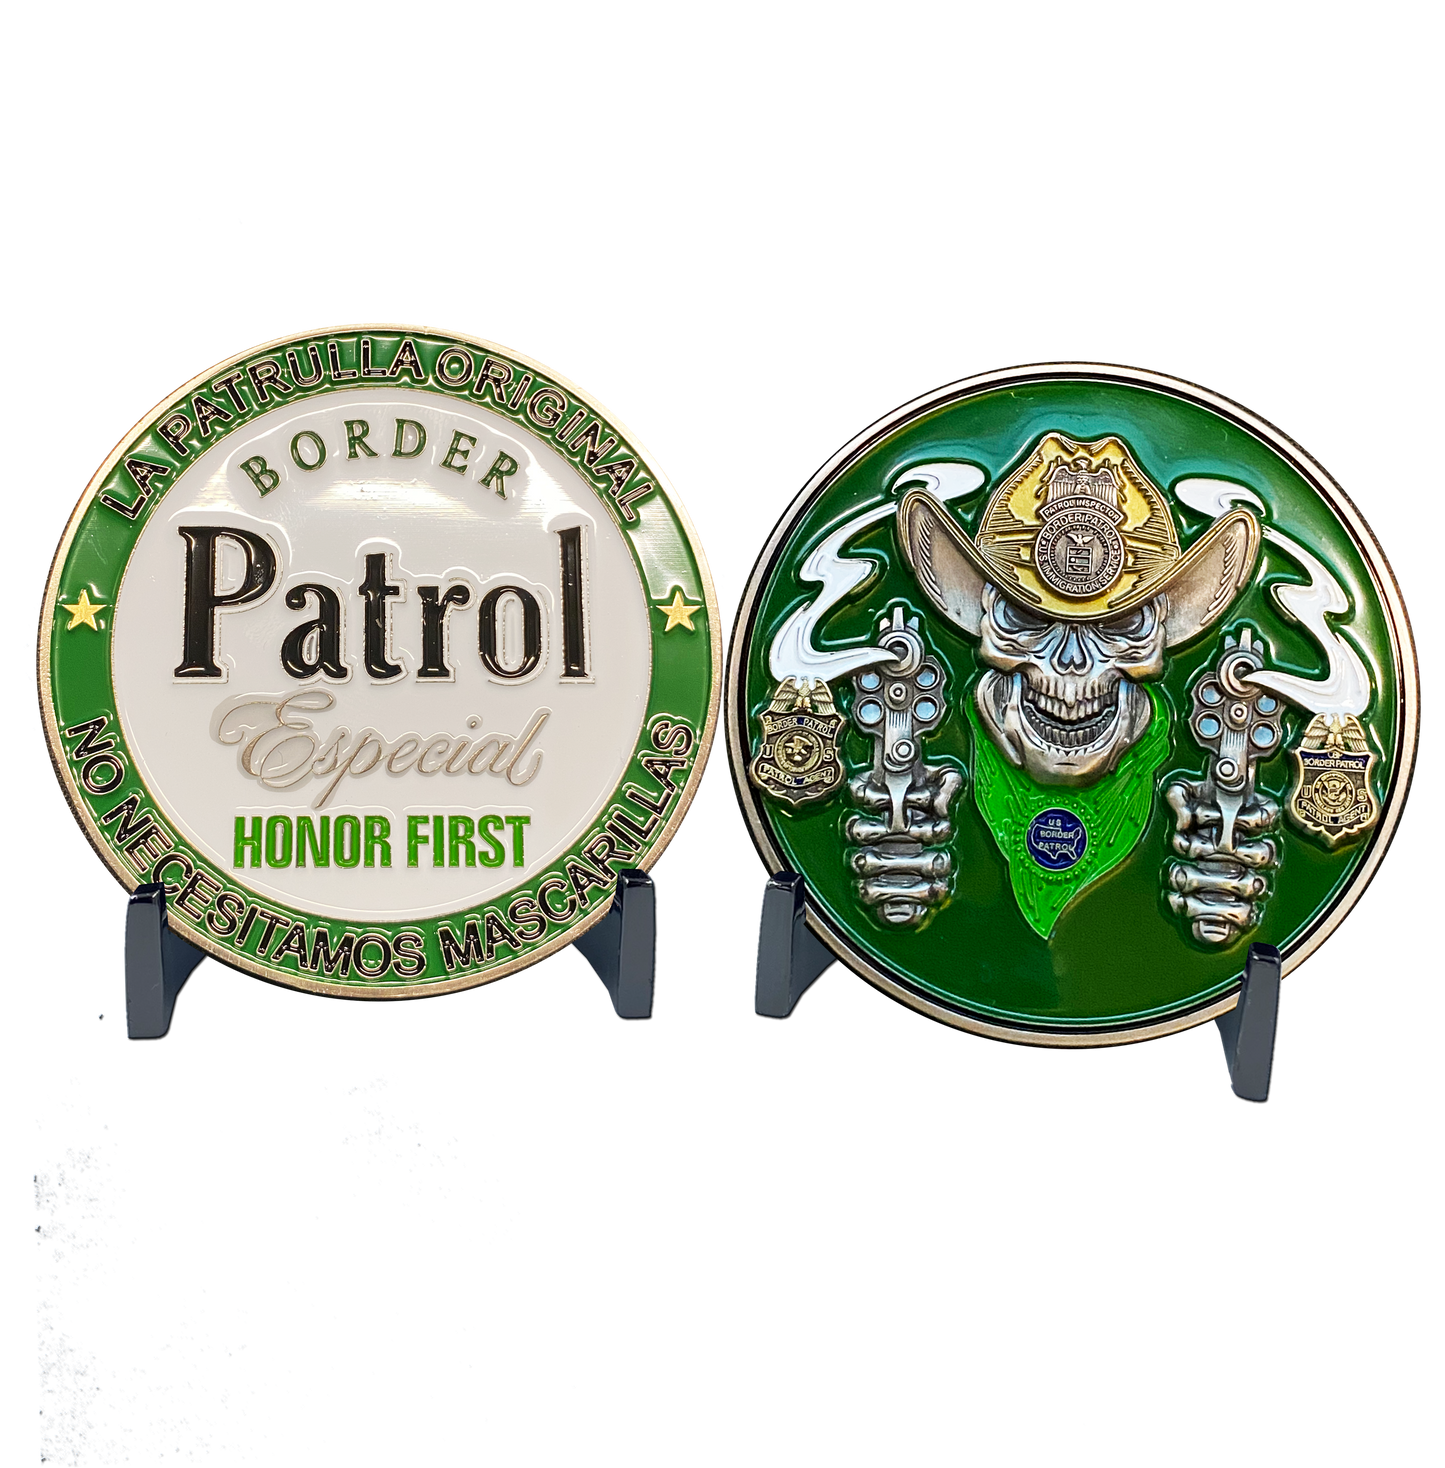 DL1-10 Border Patrol Especial Thin Green Line Challenge Coin CBP Modelo Parody We Don't Need Masks